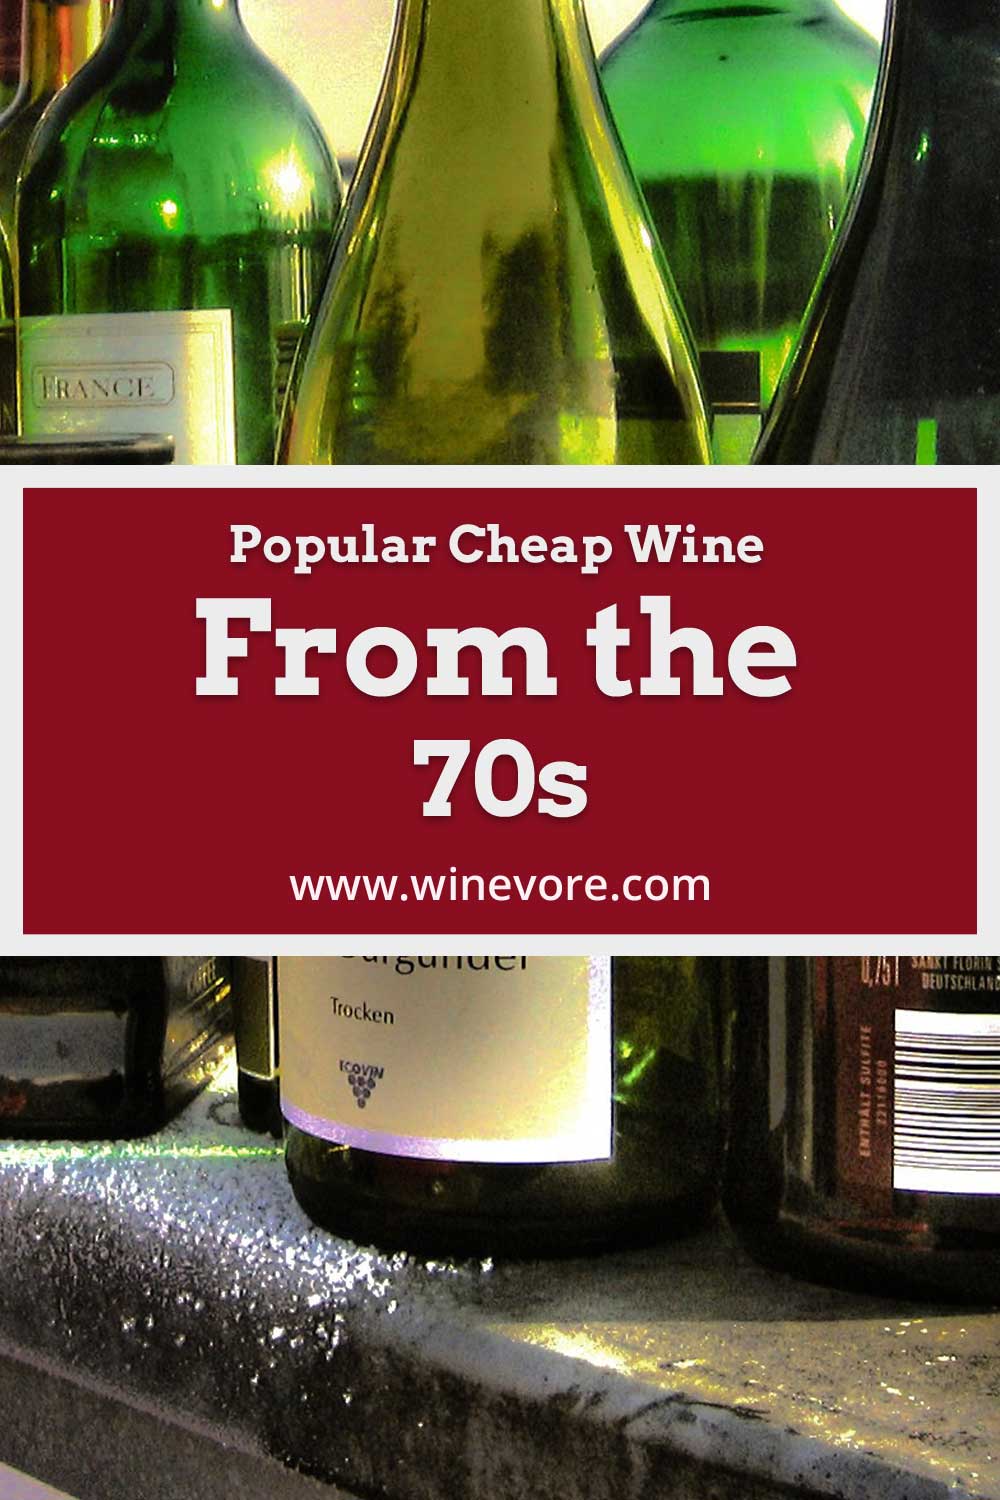 Some wine bottles - Popular Cheap Wine From the 70s.